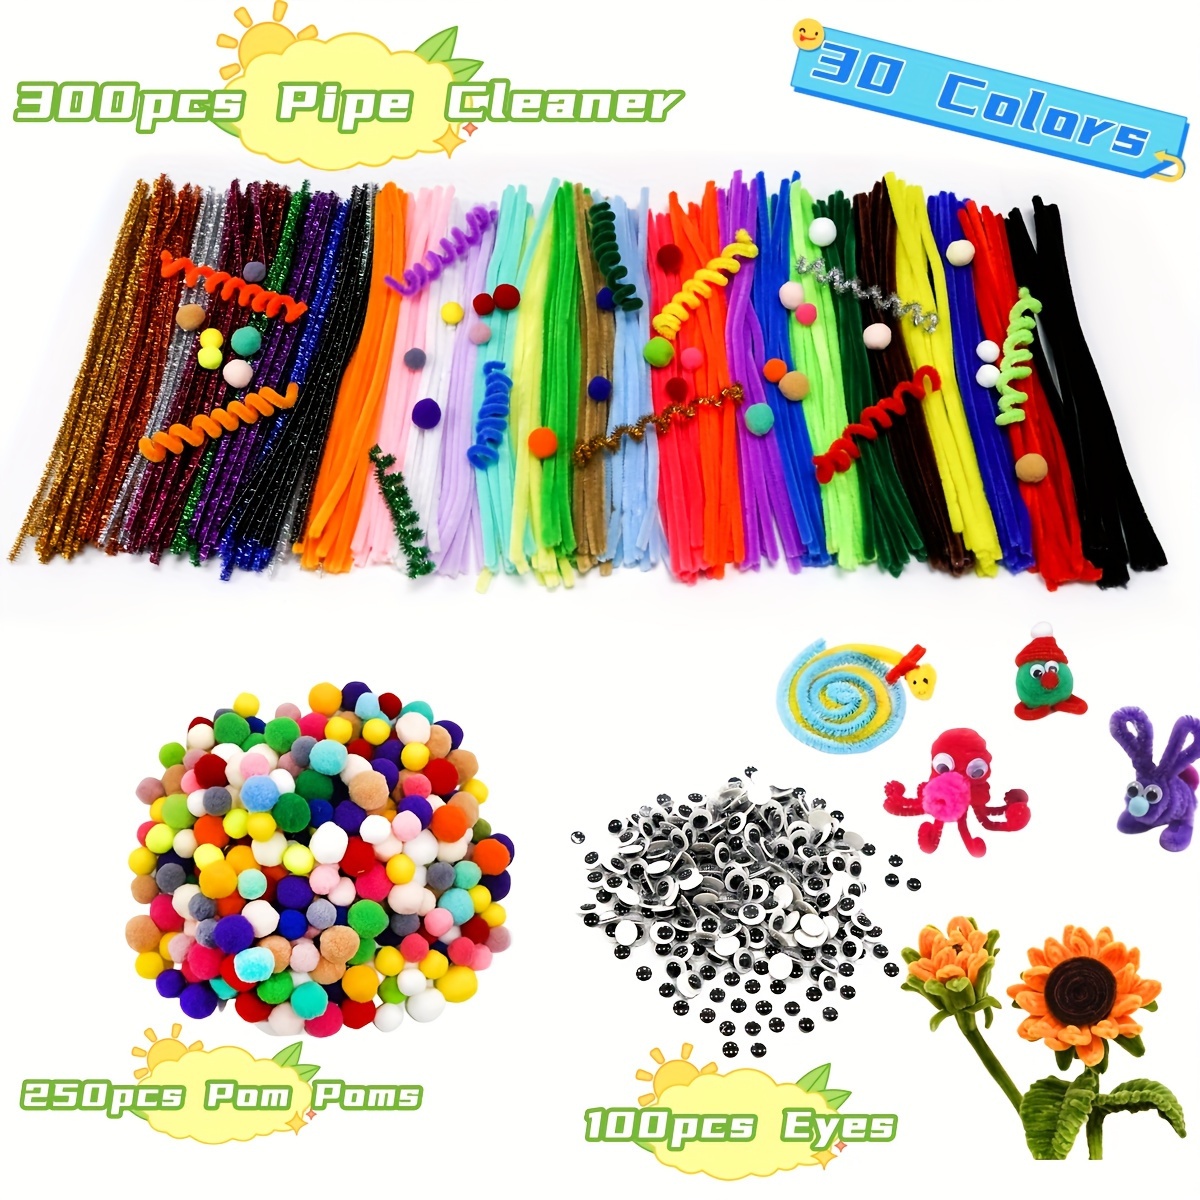 500pcs Pipe Cleaners Craft Set,Including 100 Pcs Chenille Stems 200 Pcs Pom Poms Craft 200 Pcs Wiggle Googly Eyes Self Adhesive,Assorted Colors and A